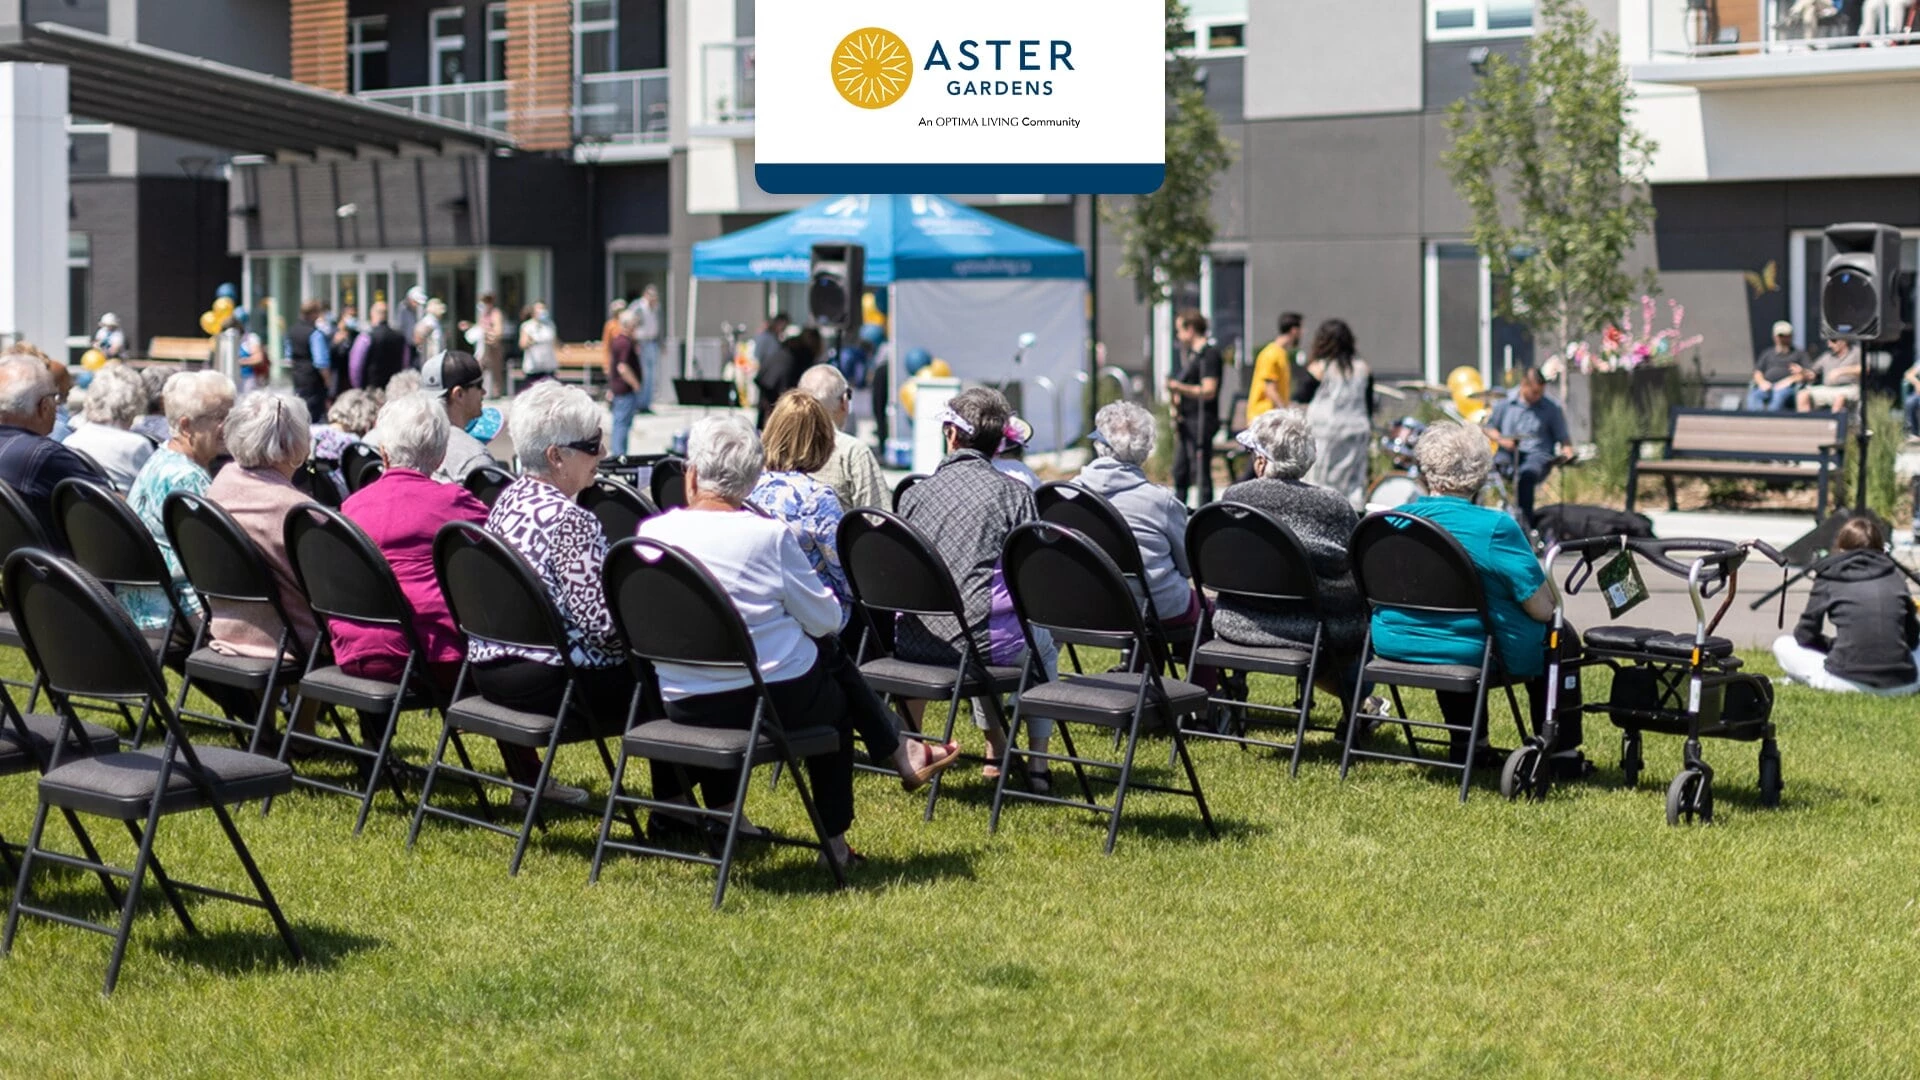 Grand Opening Ceremony at Aster Gardens